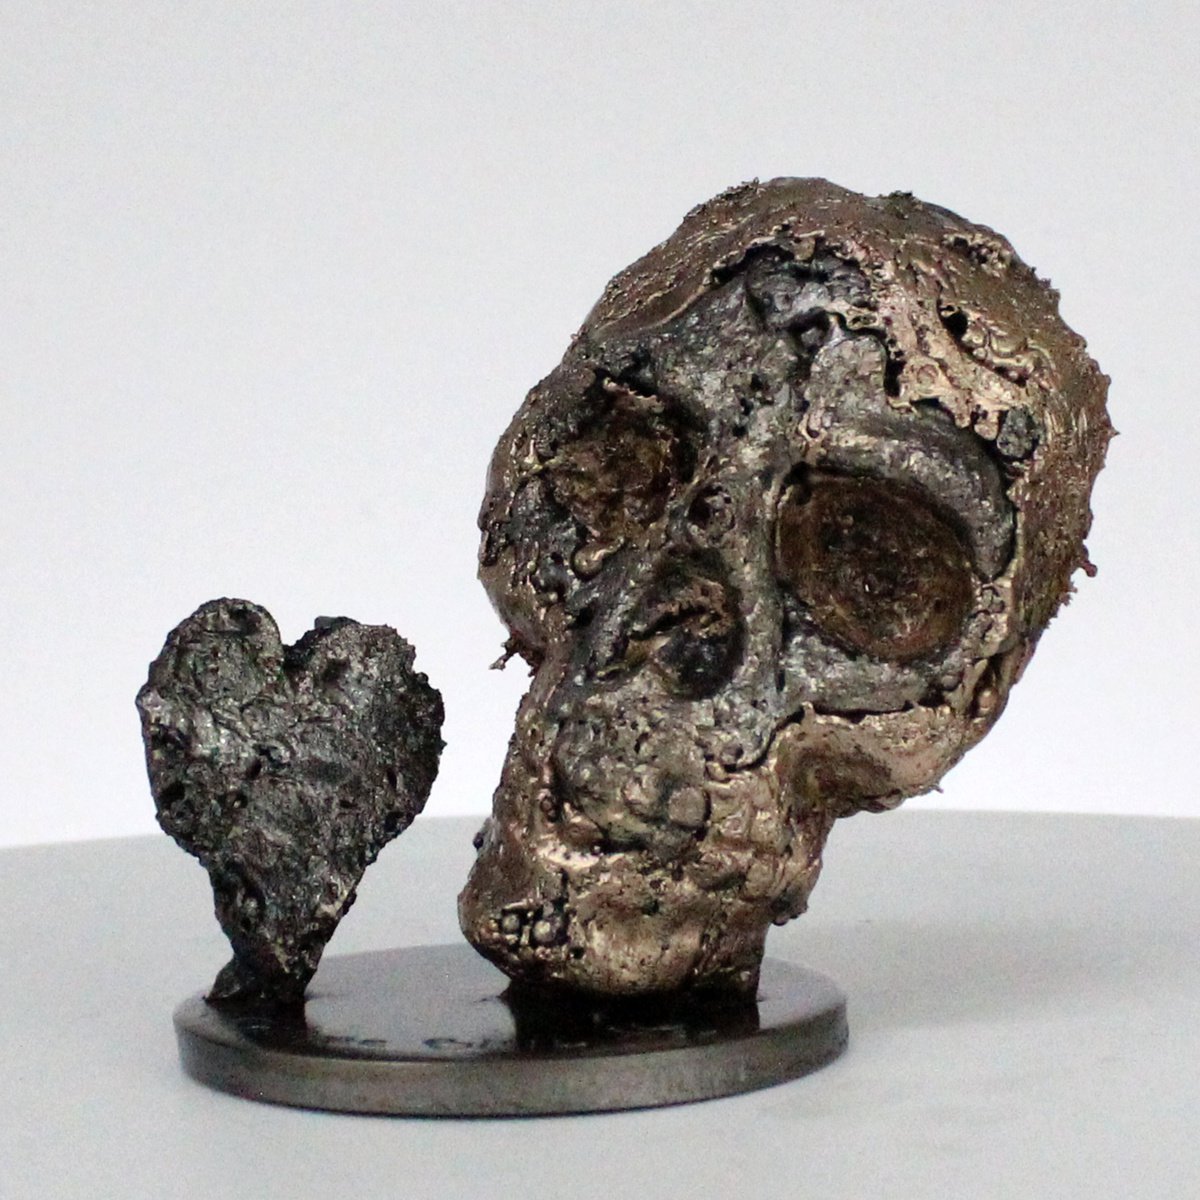 Skull 57-21 - Skull and heart artwork steel bronze sculpture by Philippe Buil